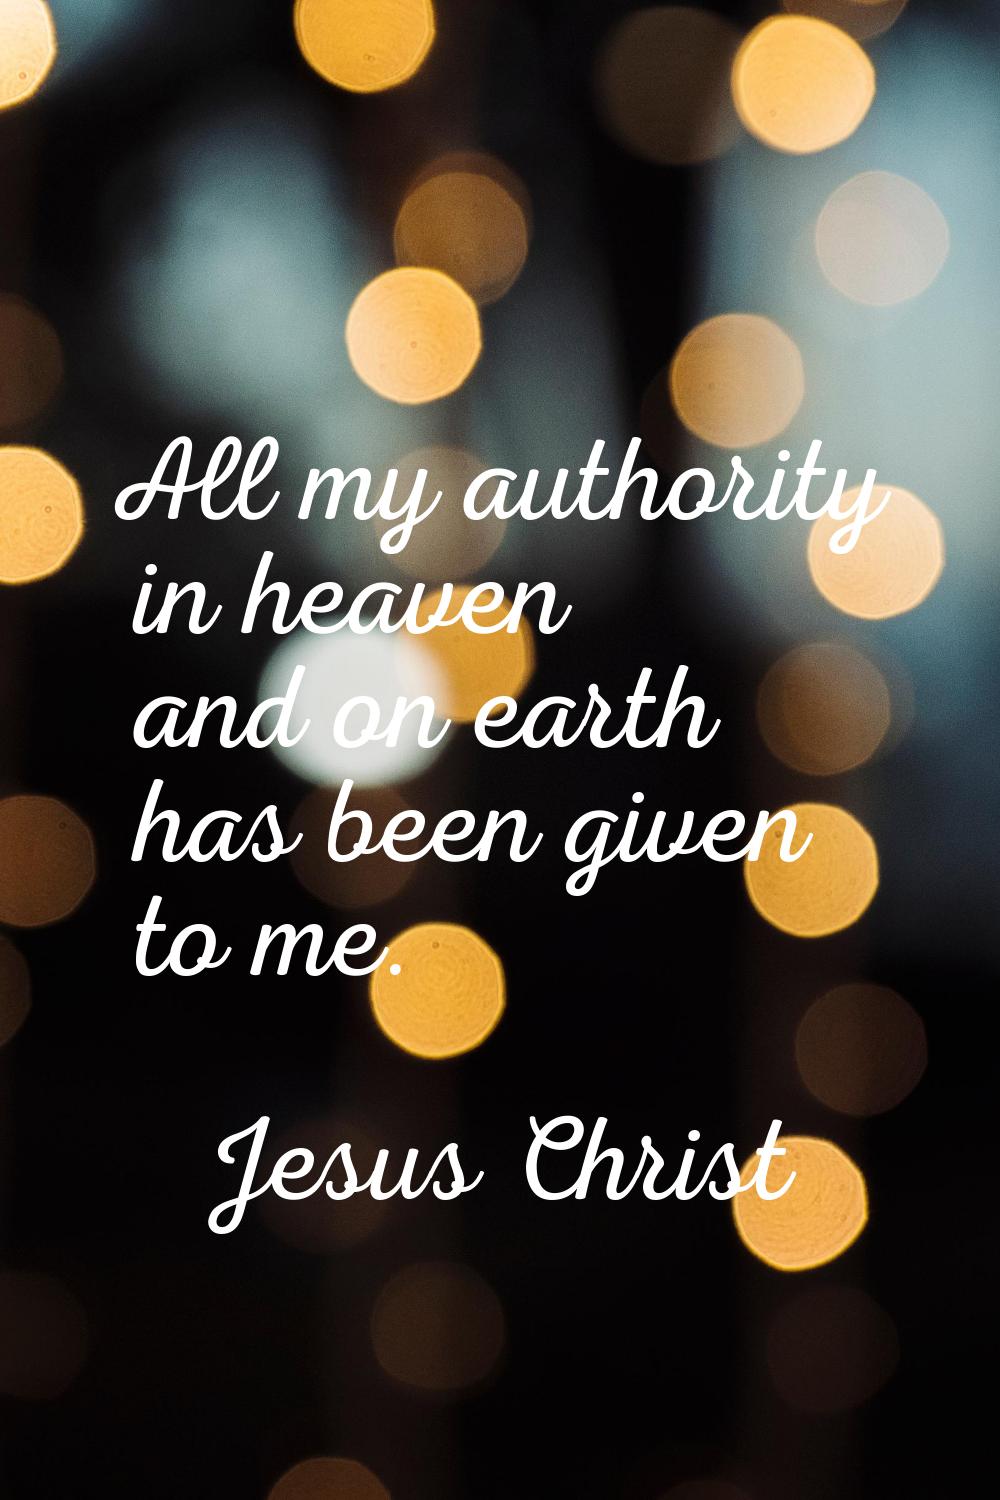 All my authority in heaven and on earth has been given to me.